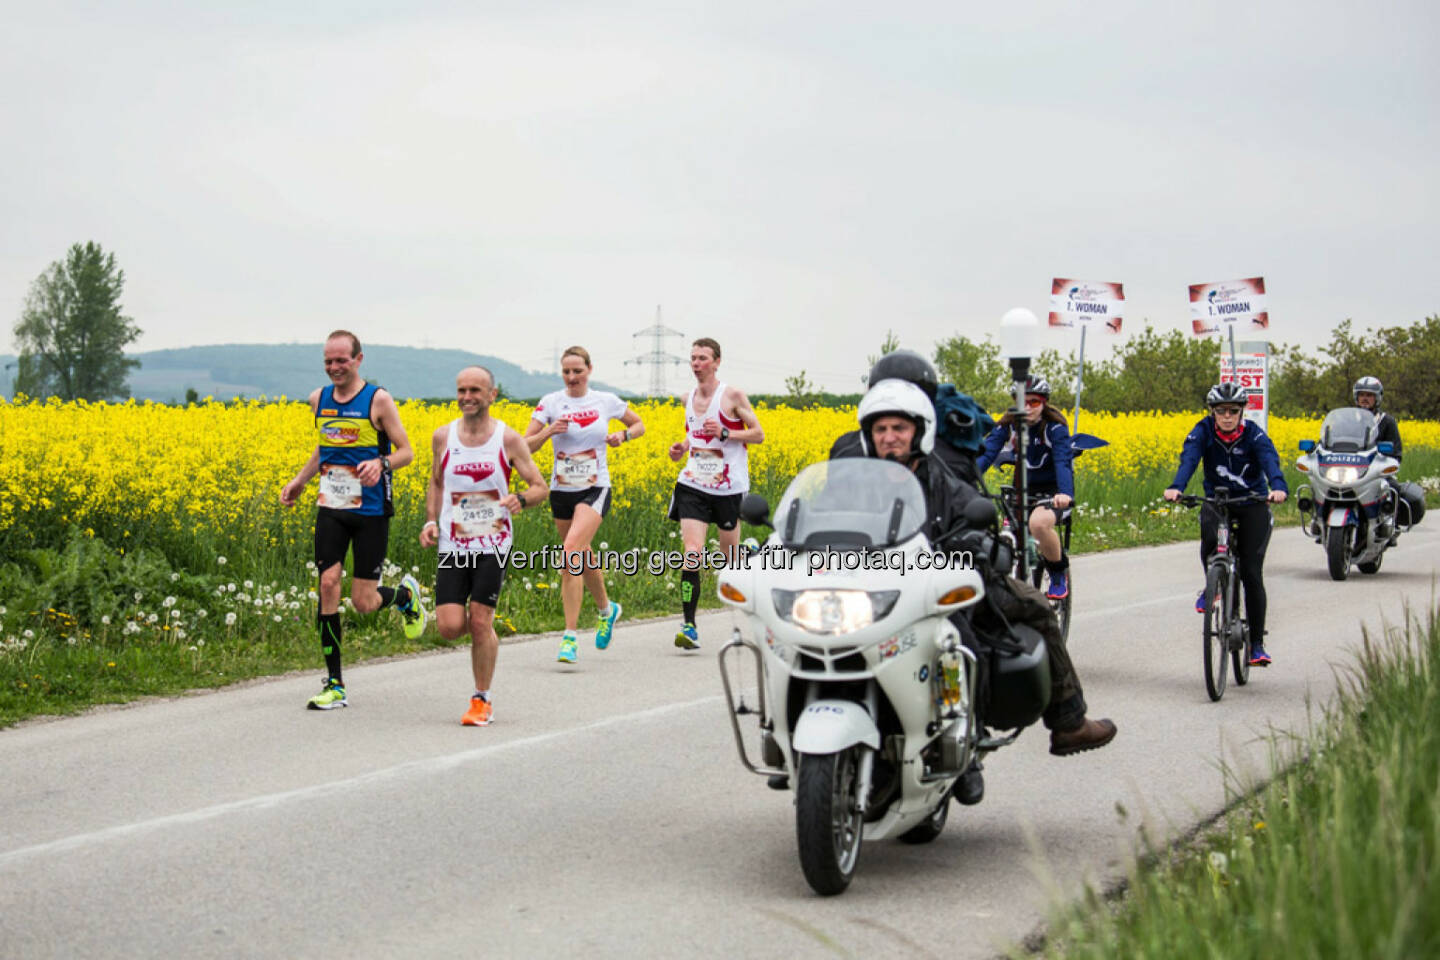 Participants perform at the Wings for Life World Run in St. Poelten, Austria on May, 3rd 2015. // Philipp Greindl for Wings for Life World Run //Please go to www.redbullcontentpool.com for further information. // 